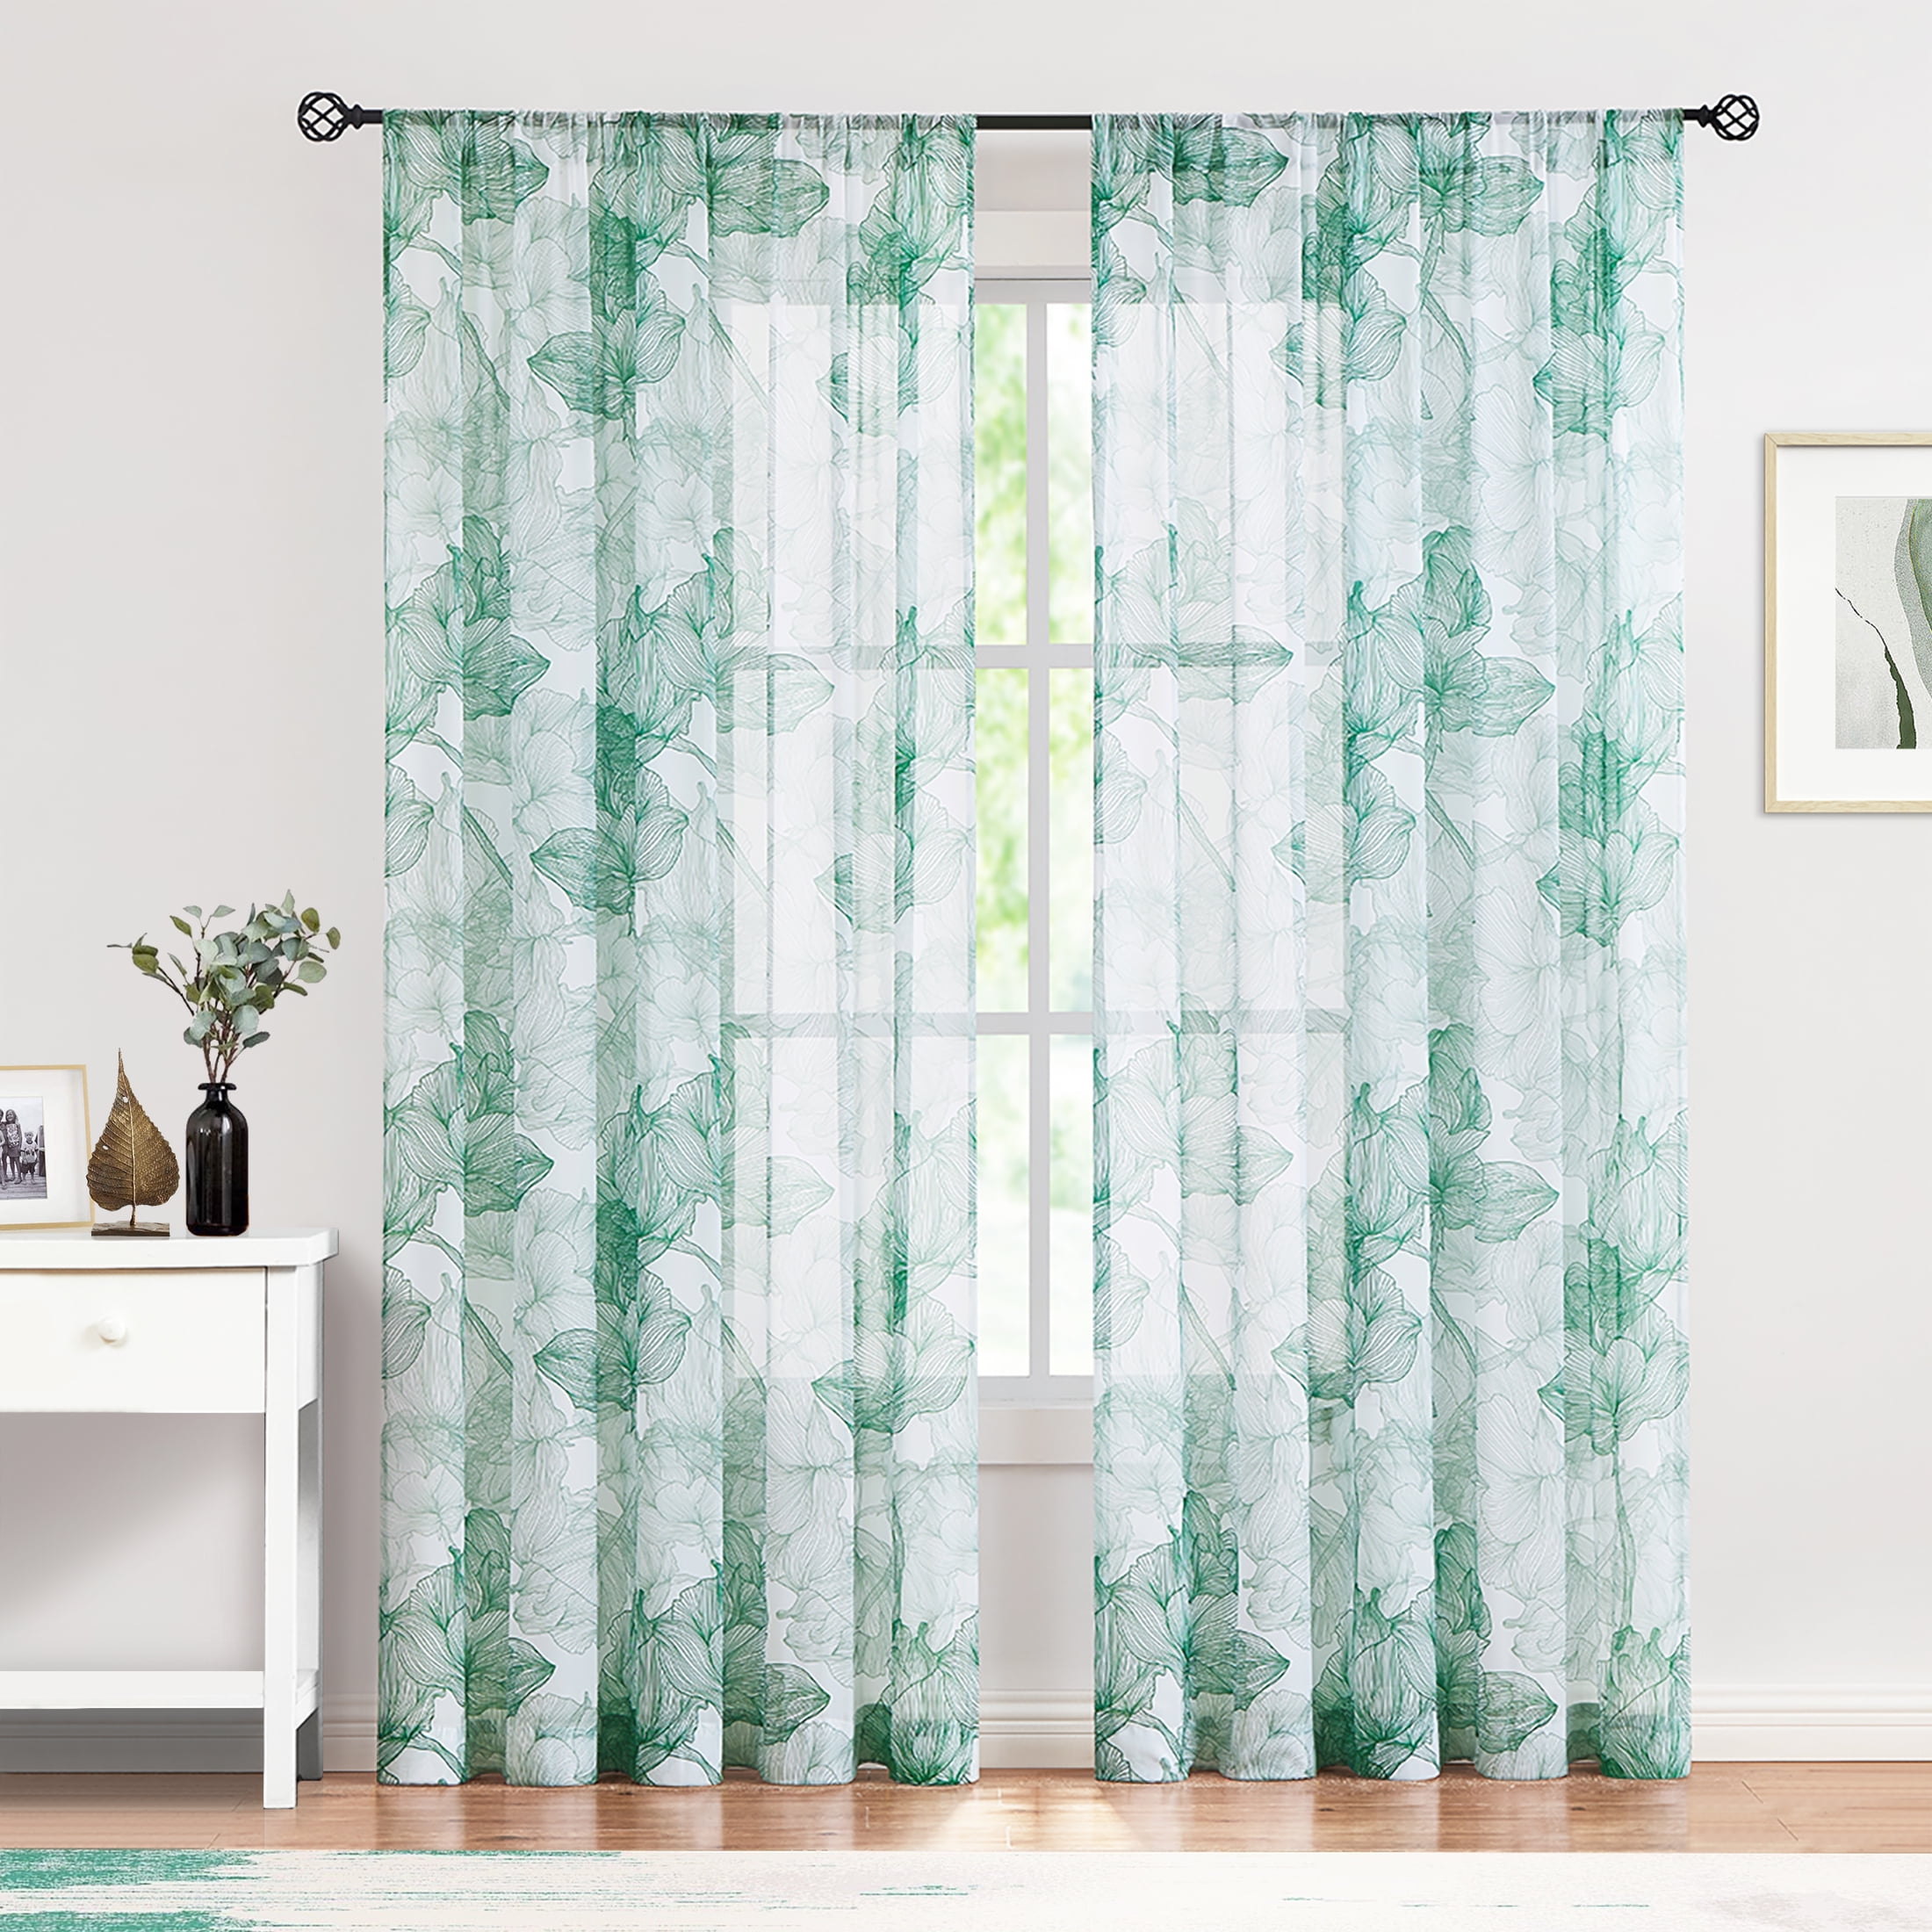 Exultantex Green White Semi Sheer Curtains 84inches LongLine Drawing ...